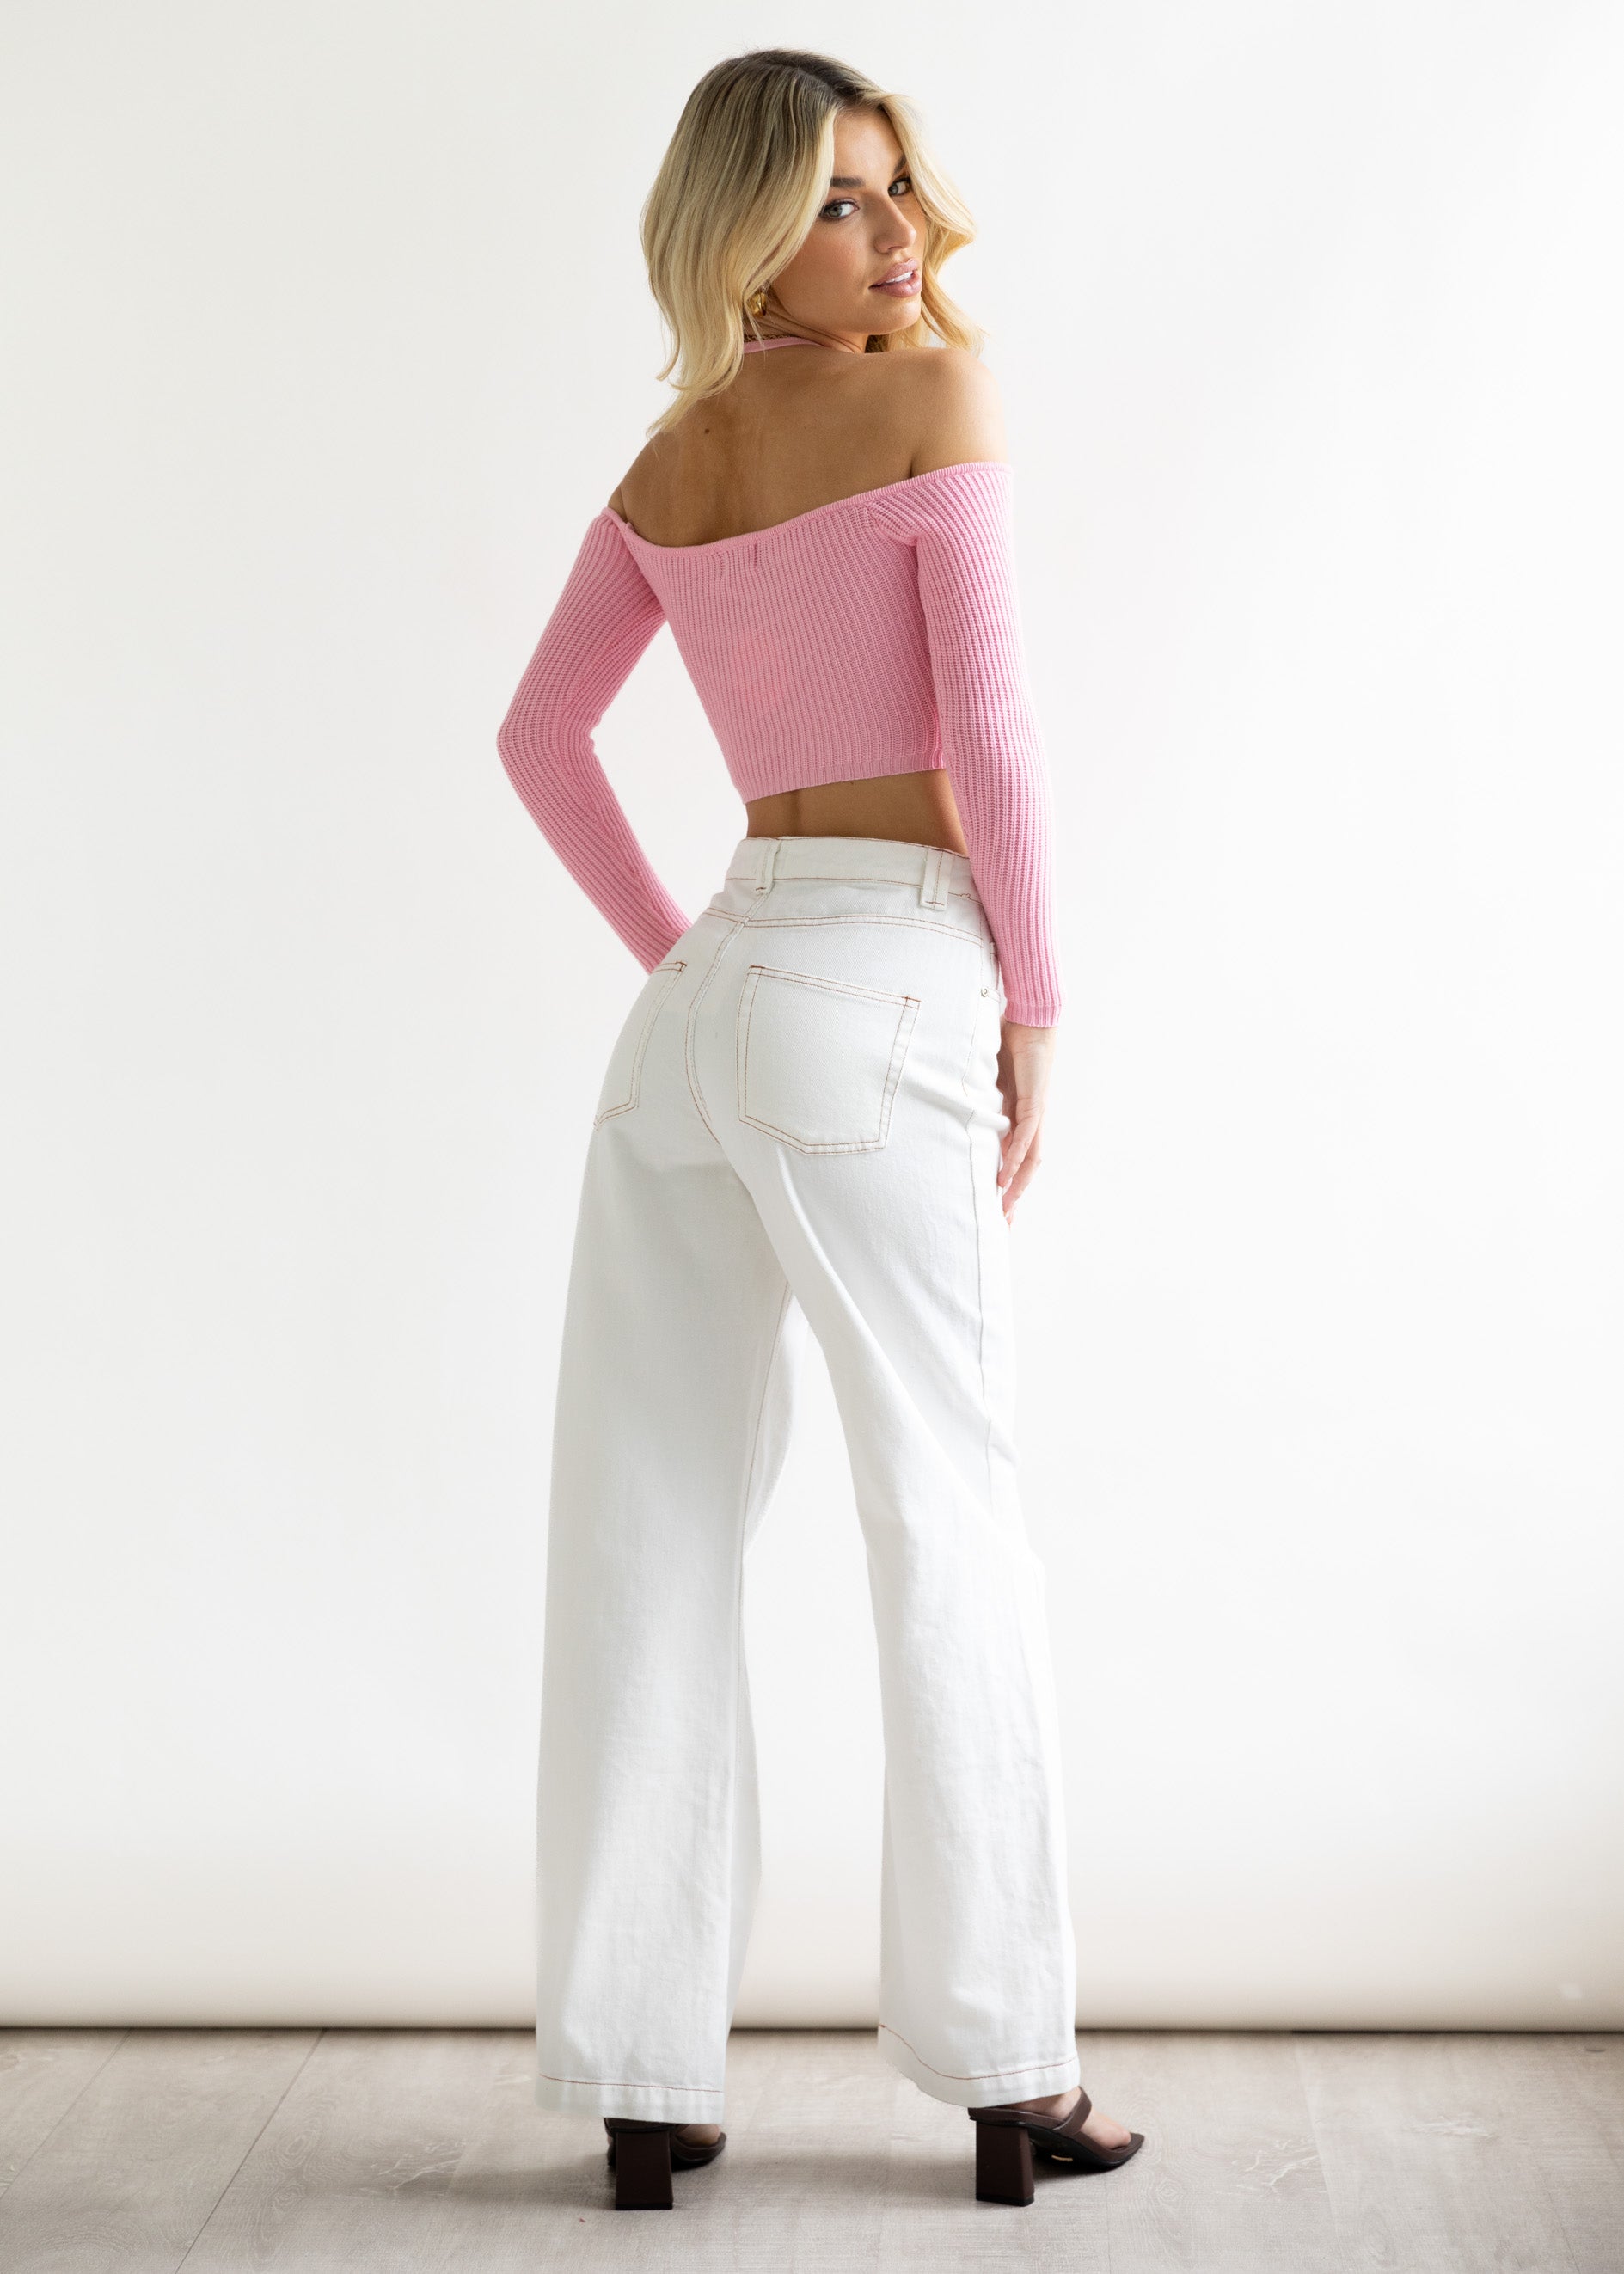 California Cool Knit Top - Pink